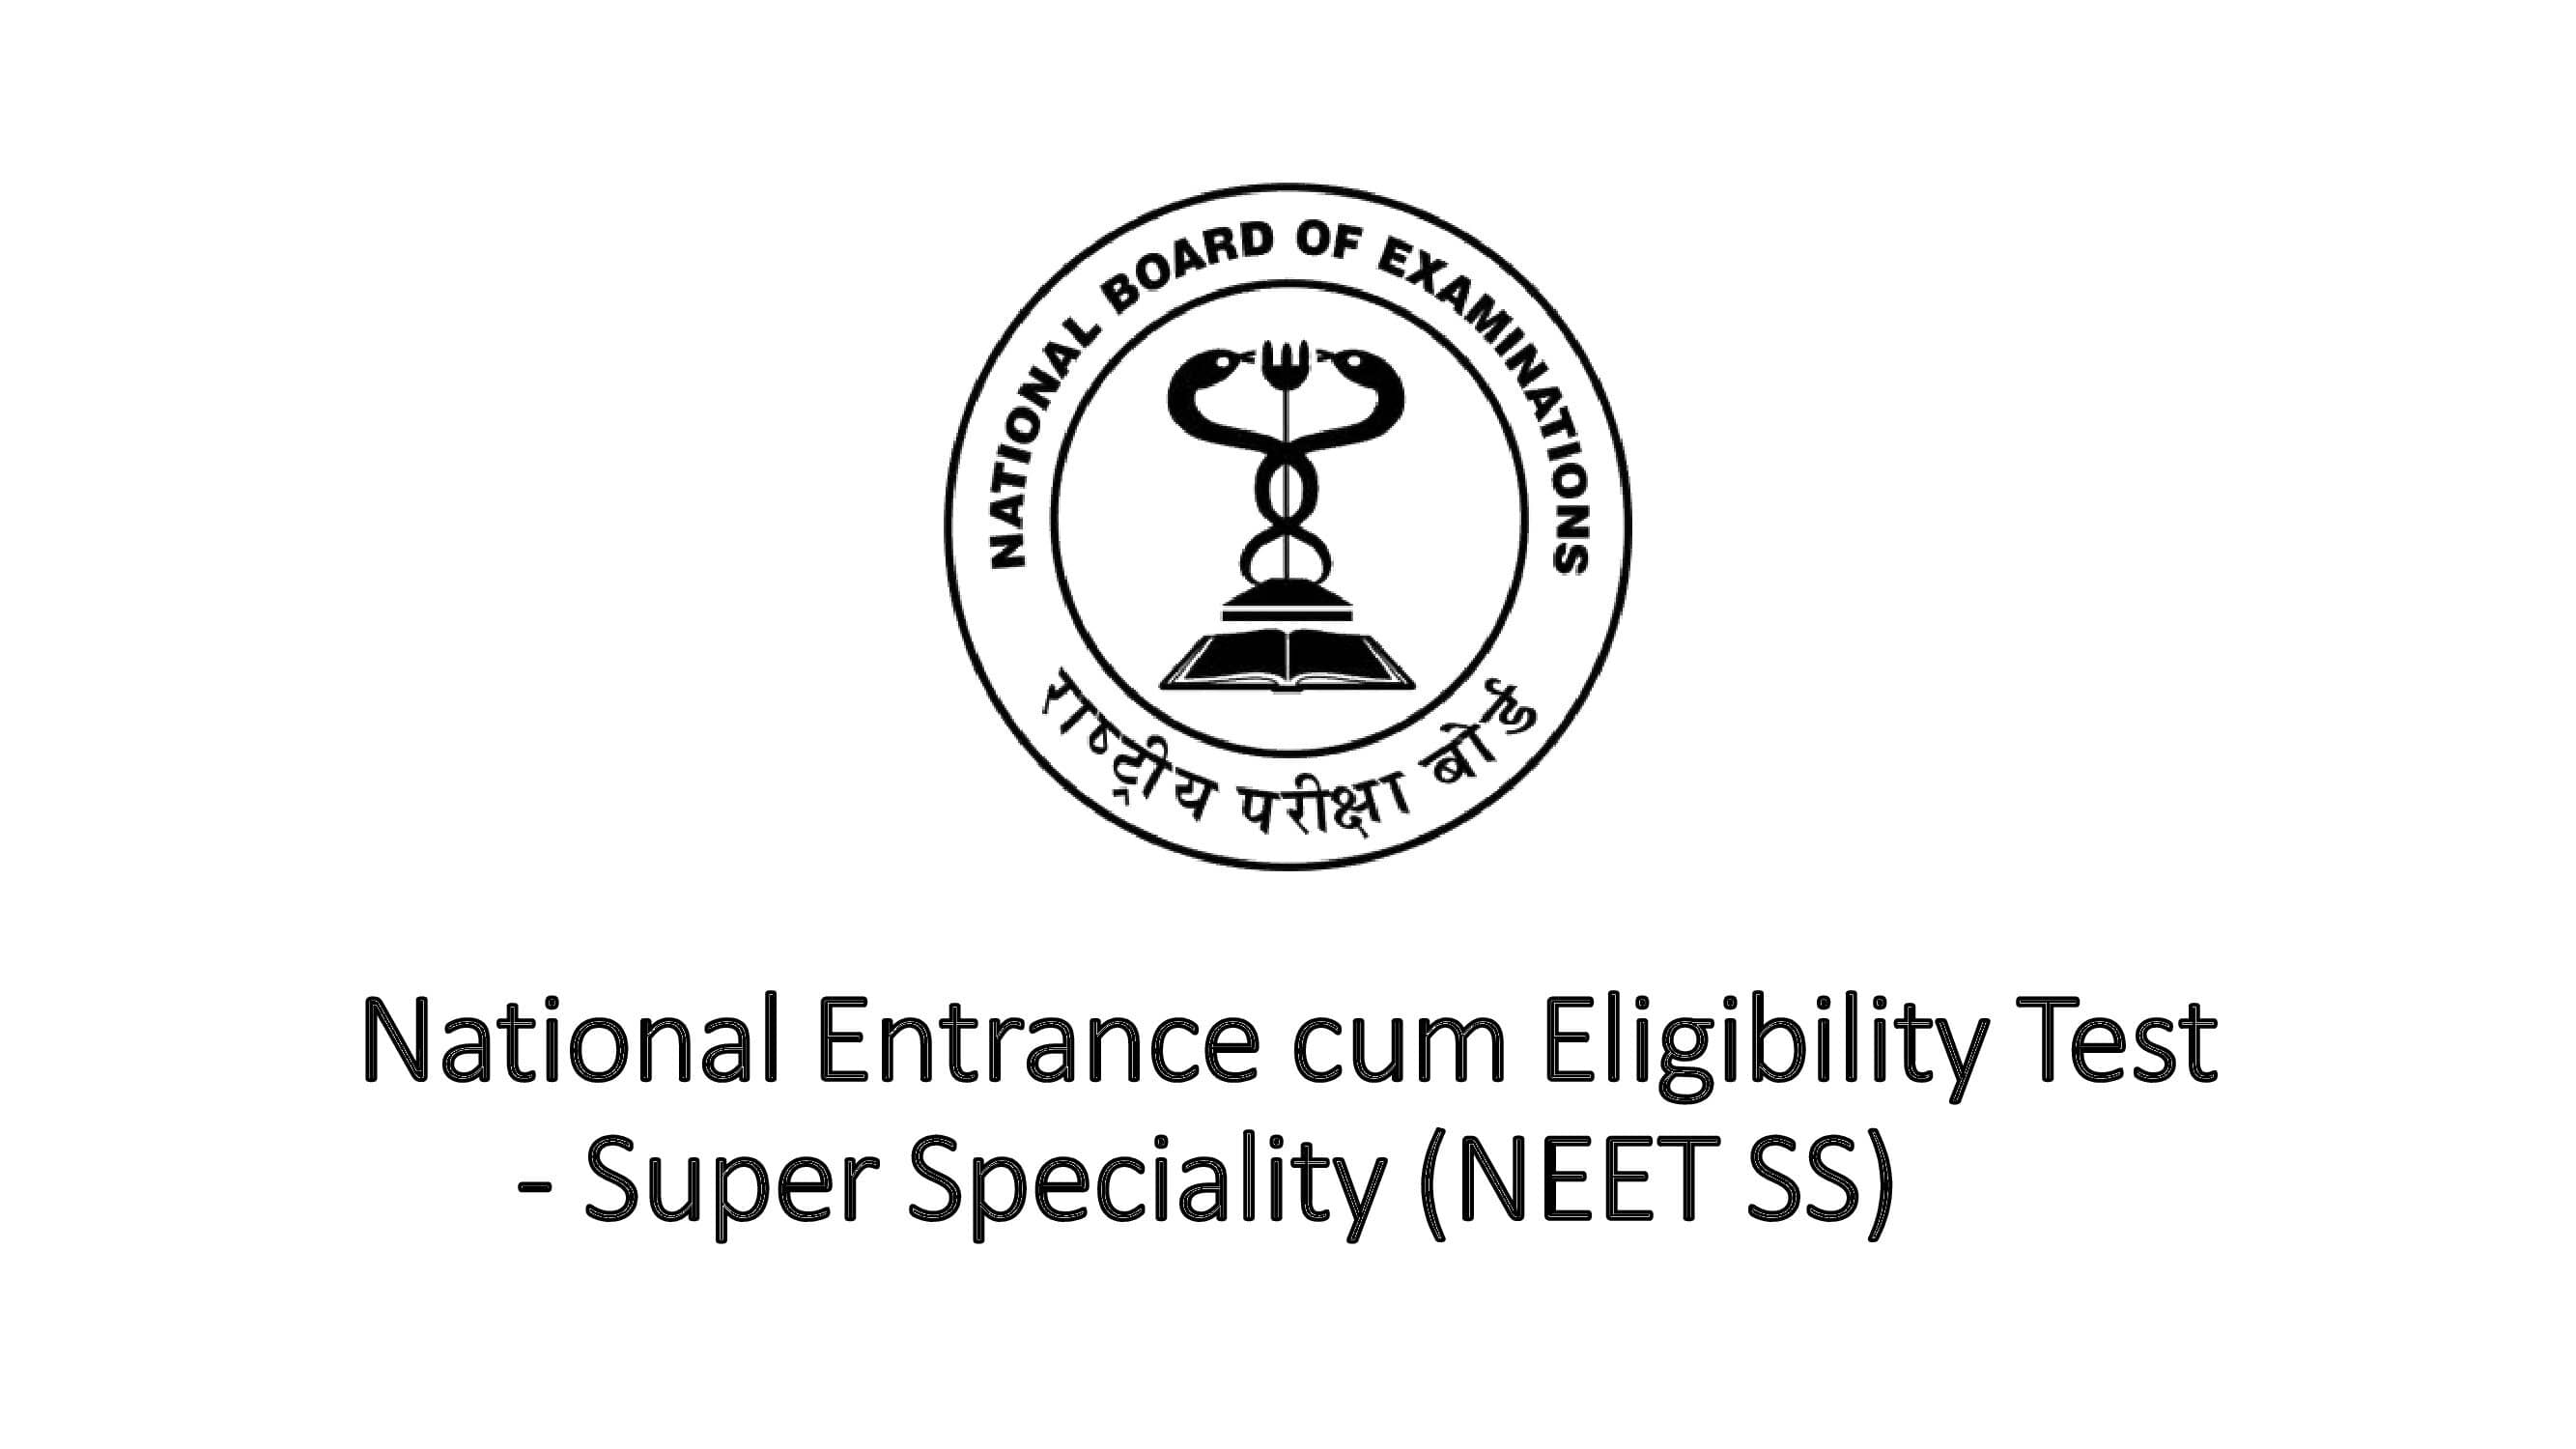 National Entrance cum Eligibility Test - Super Speciality (NEET SS)